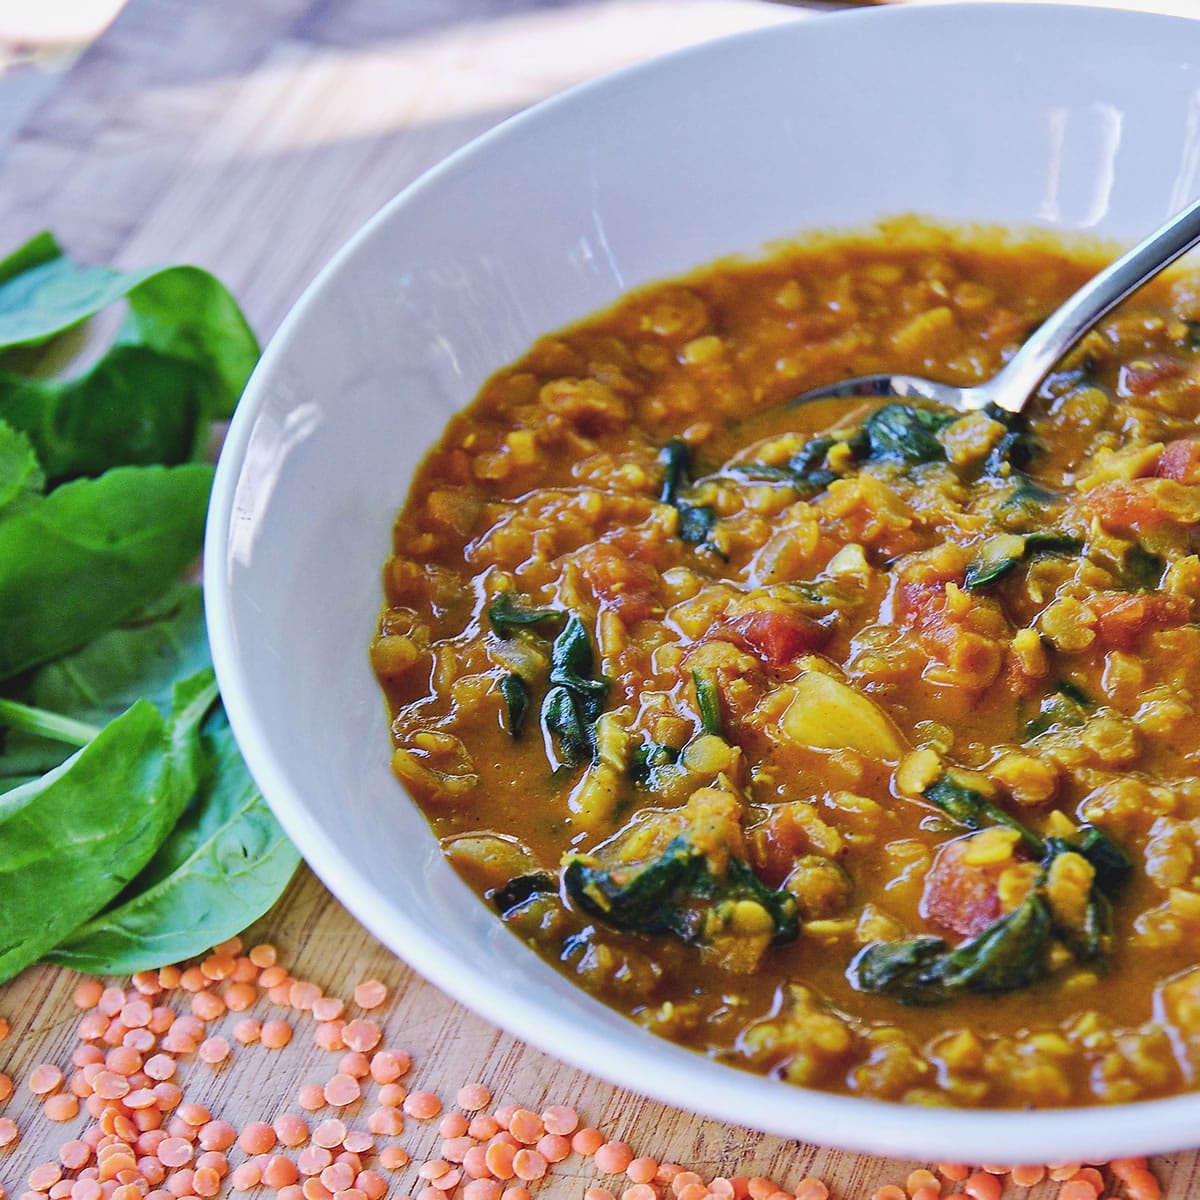 Coconut Curry Lentil Stew is gluten-free and high in fiber.